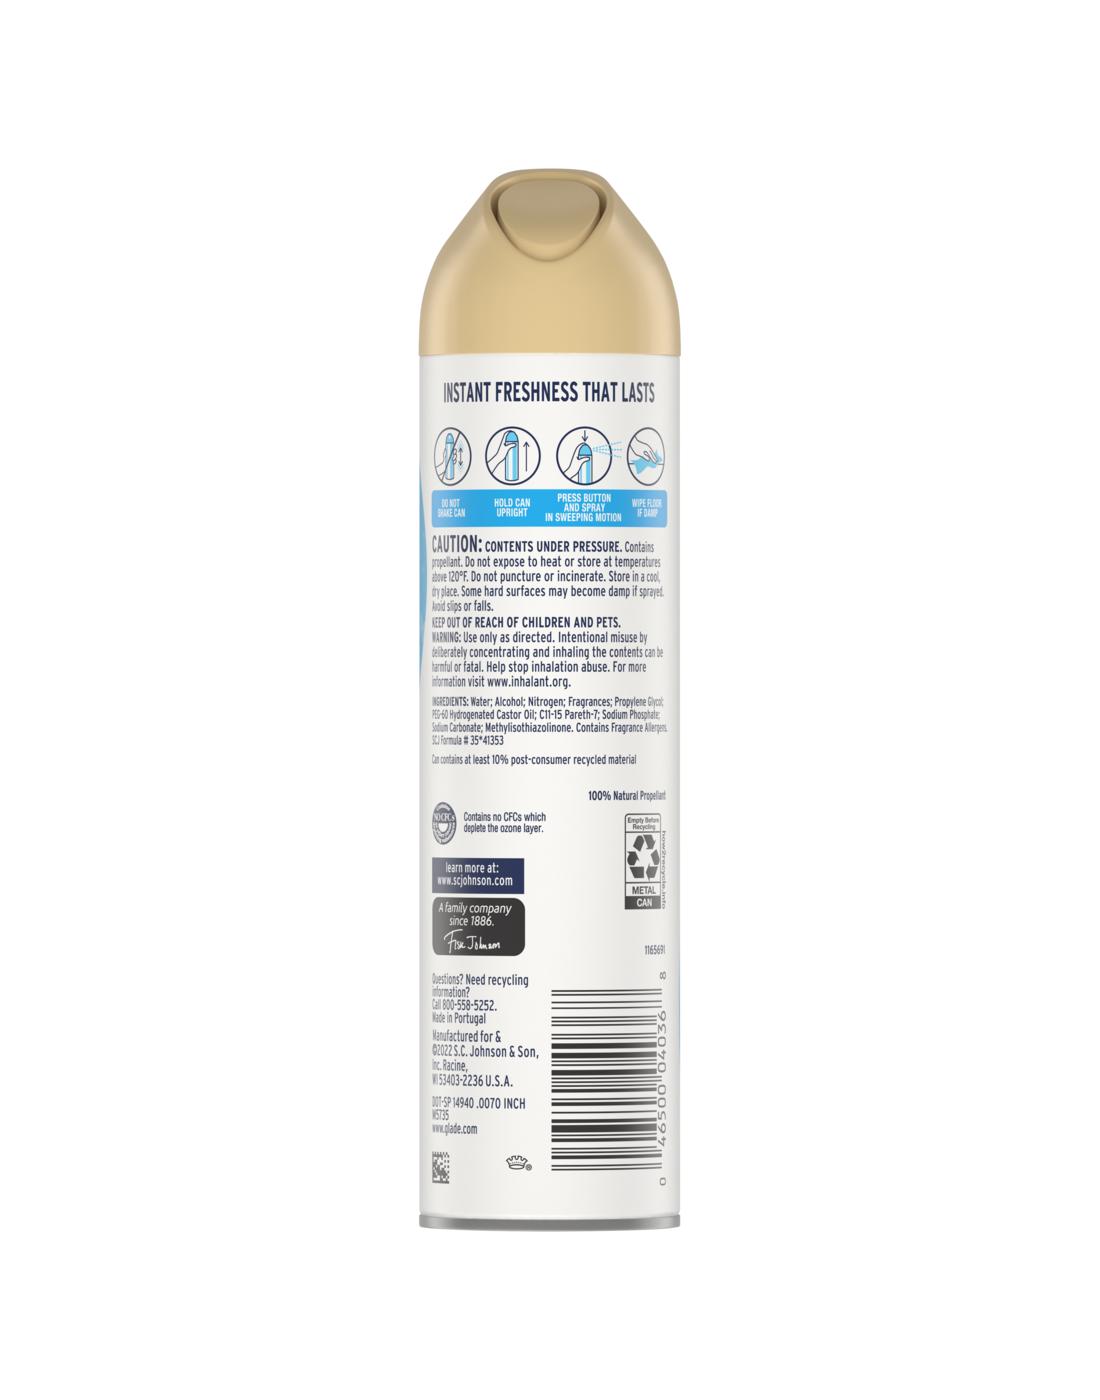 Glade Cotton Laundry Air Freshener Room Spray; image 2 of 2